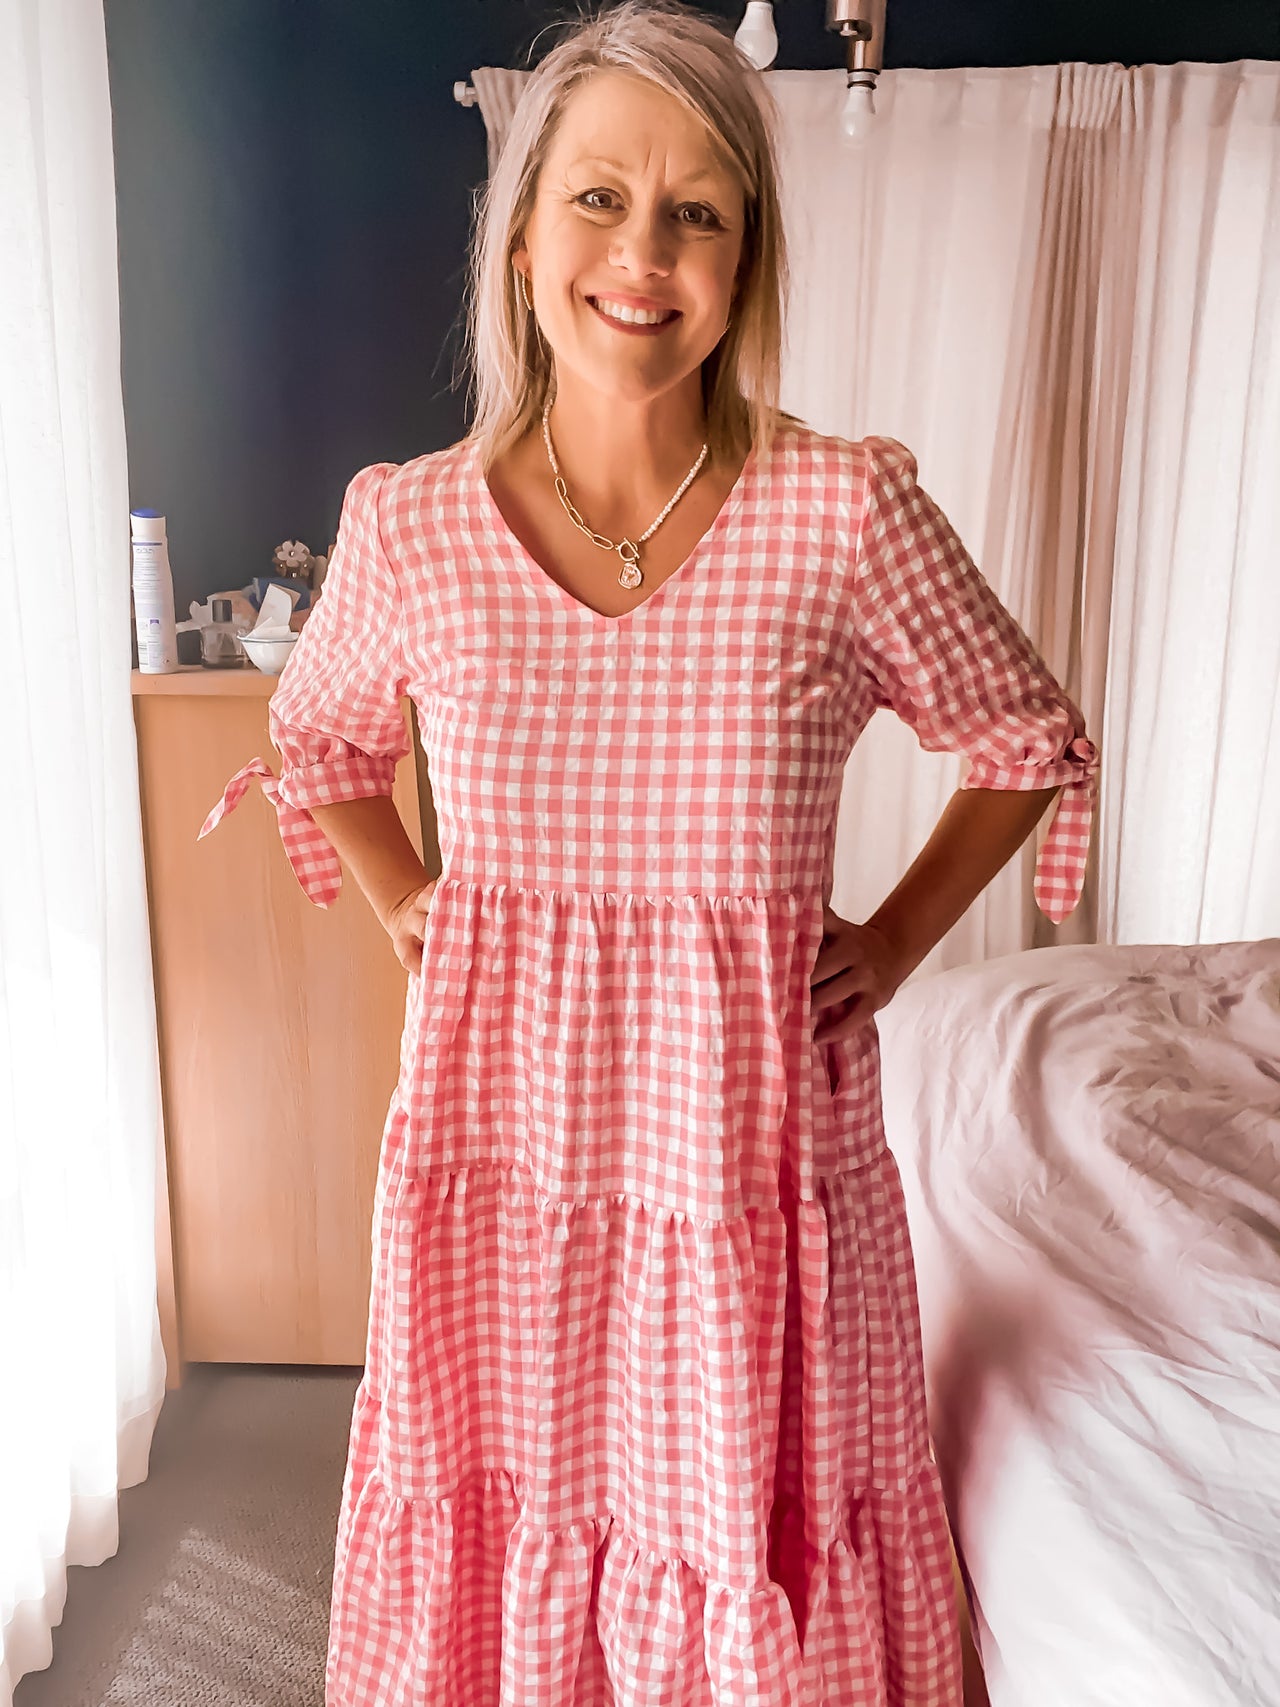 Kehlana Tiered Midi Dress In Pink With White Gingham – St Frock